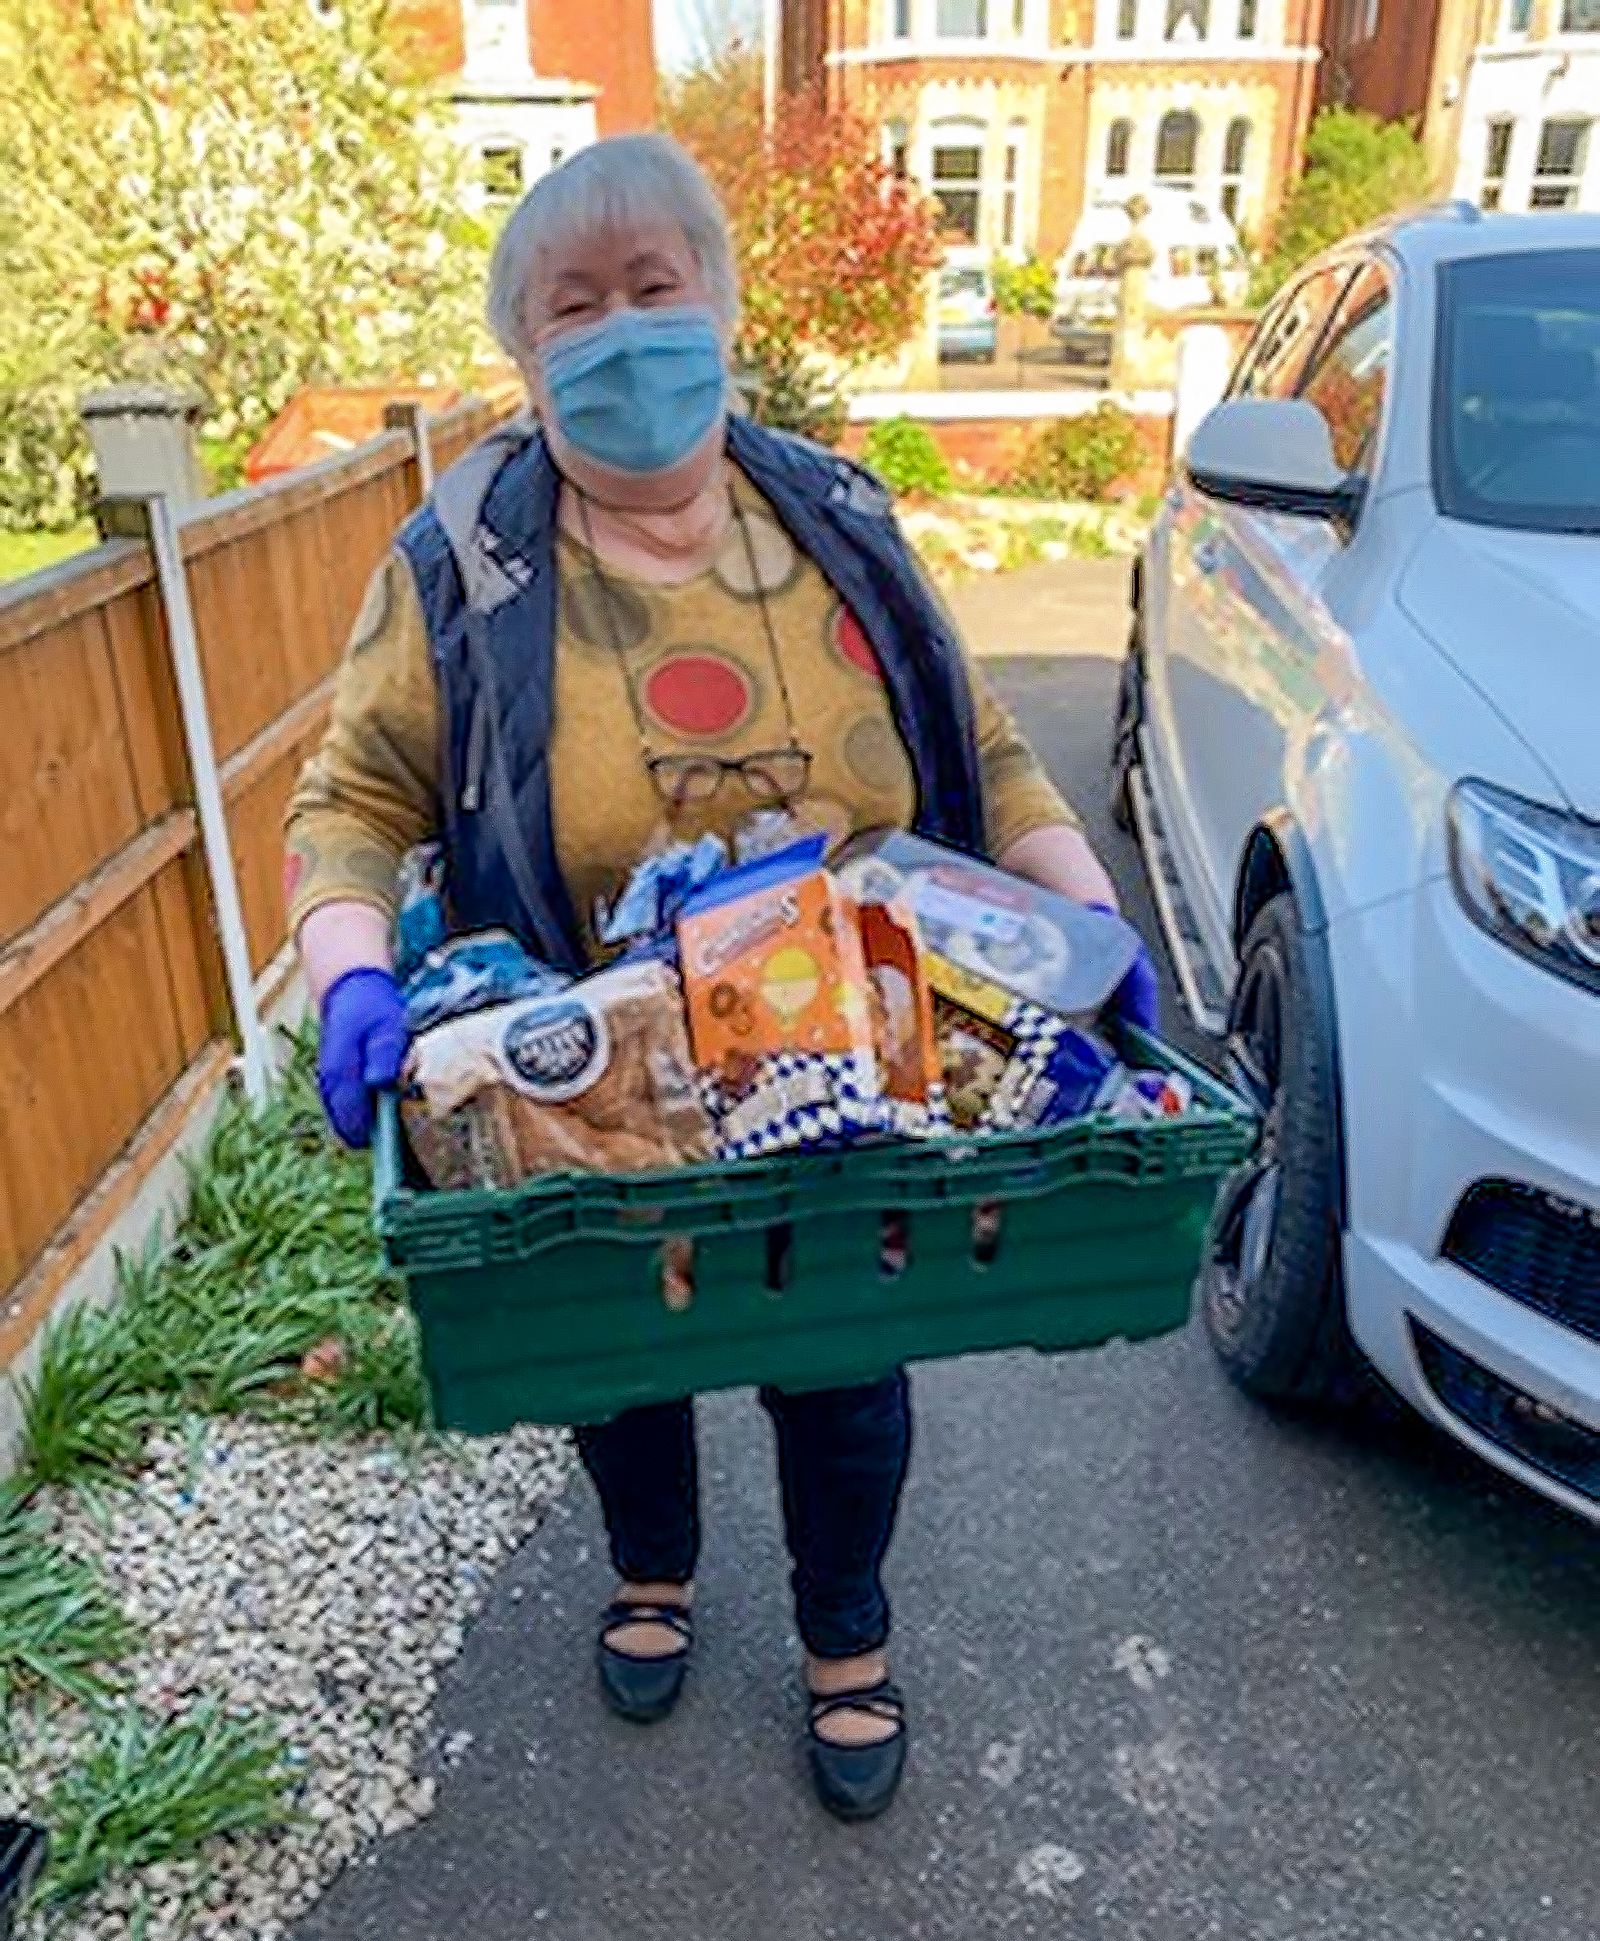 A volunteer that is wearing a facemask and a colorful sweater stands in a driveway while holding a box of goods that is ready to be delivered to people affected by the coronavirus shutdowns.